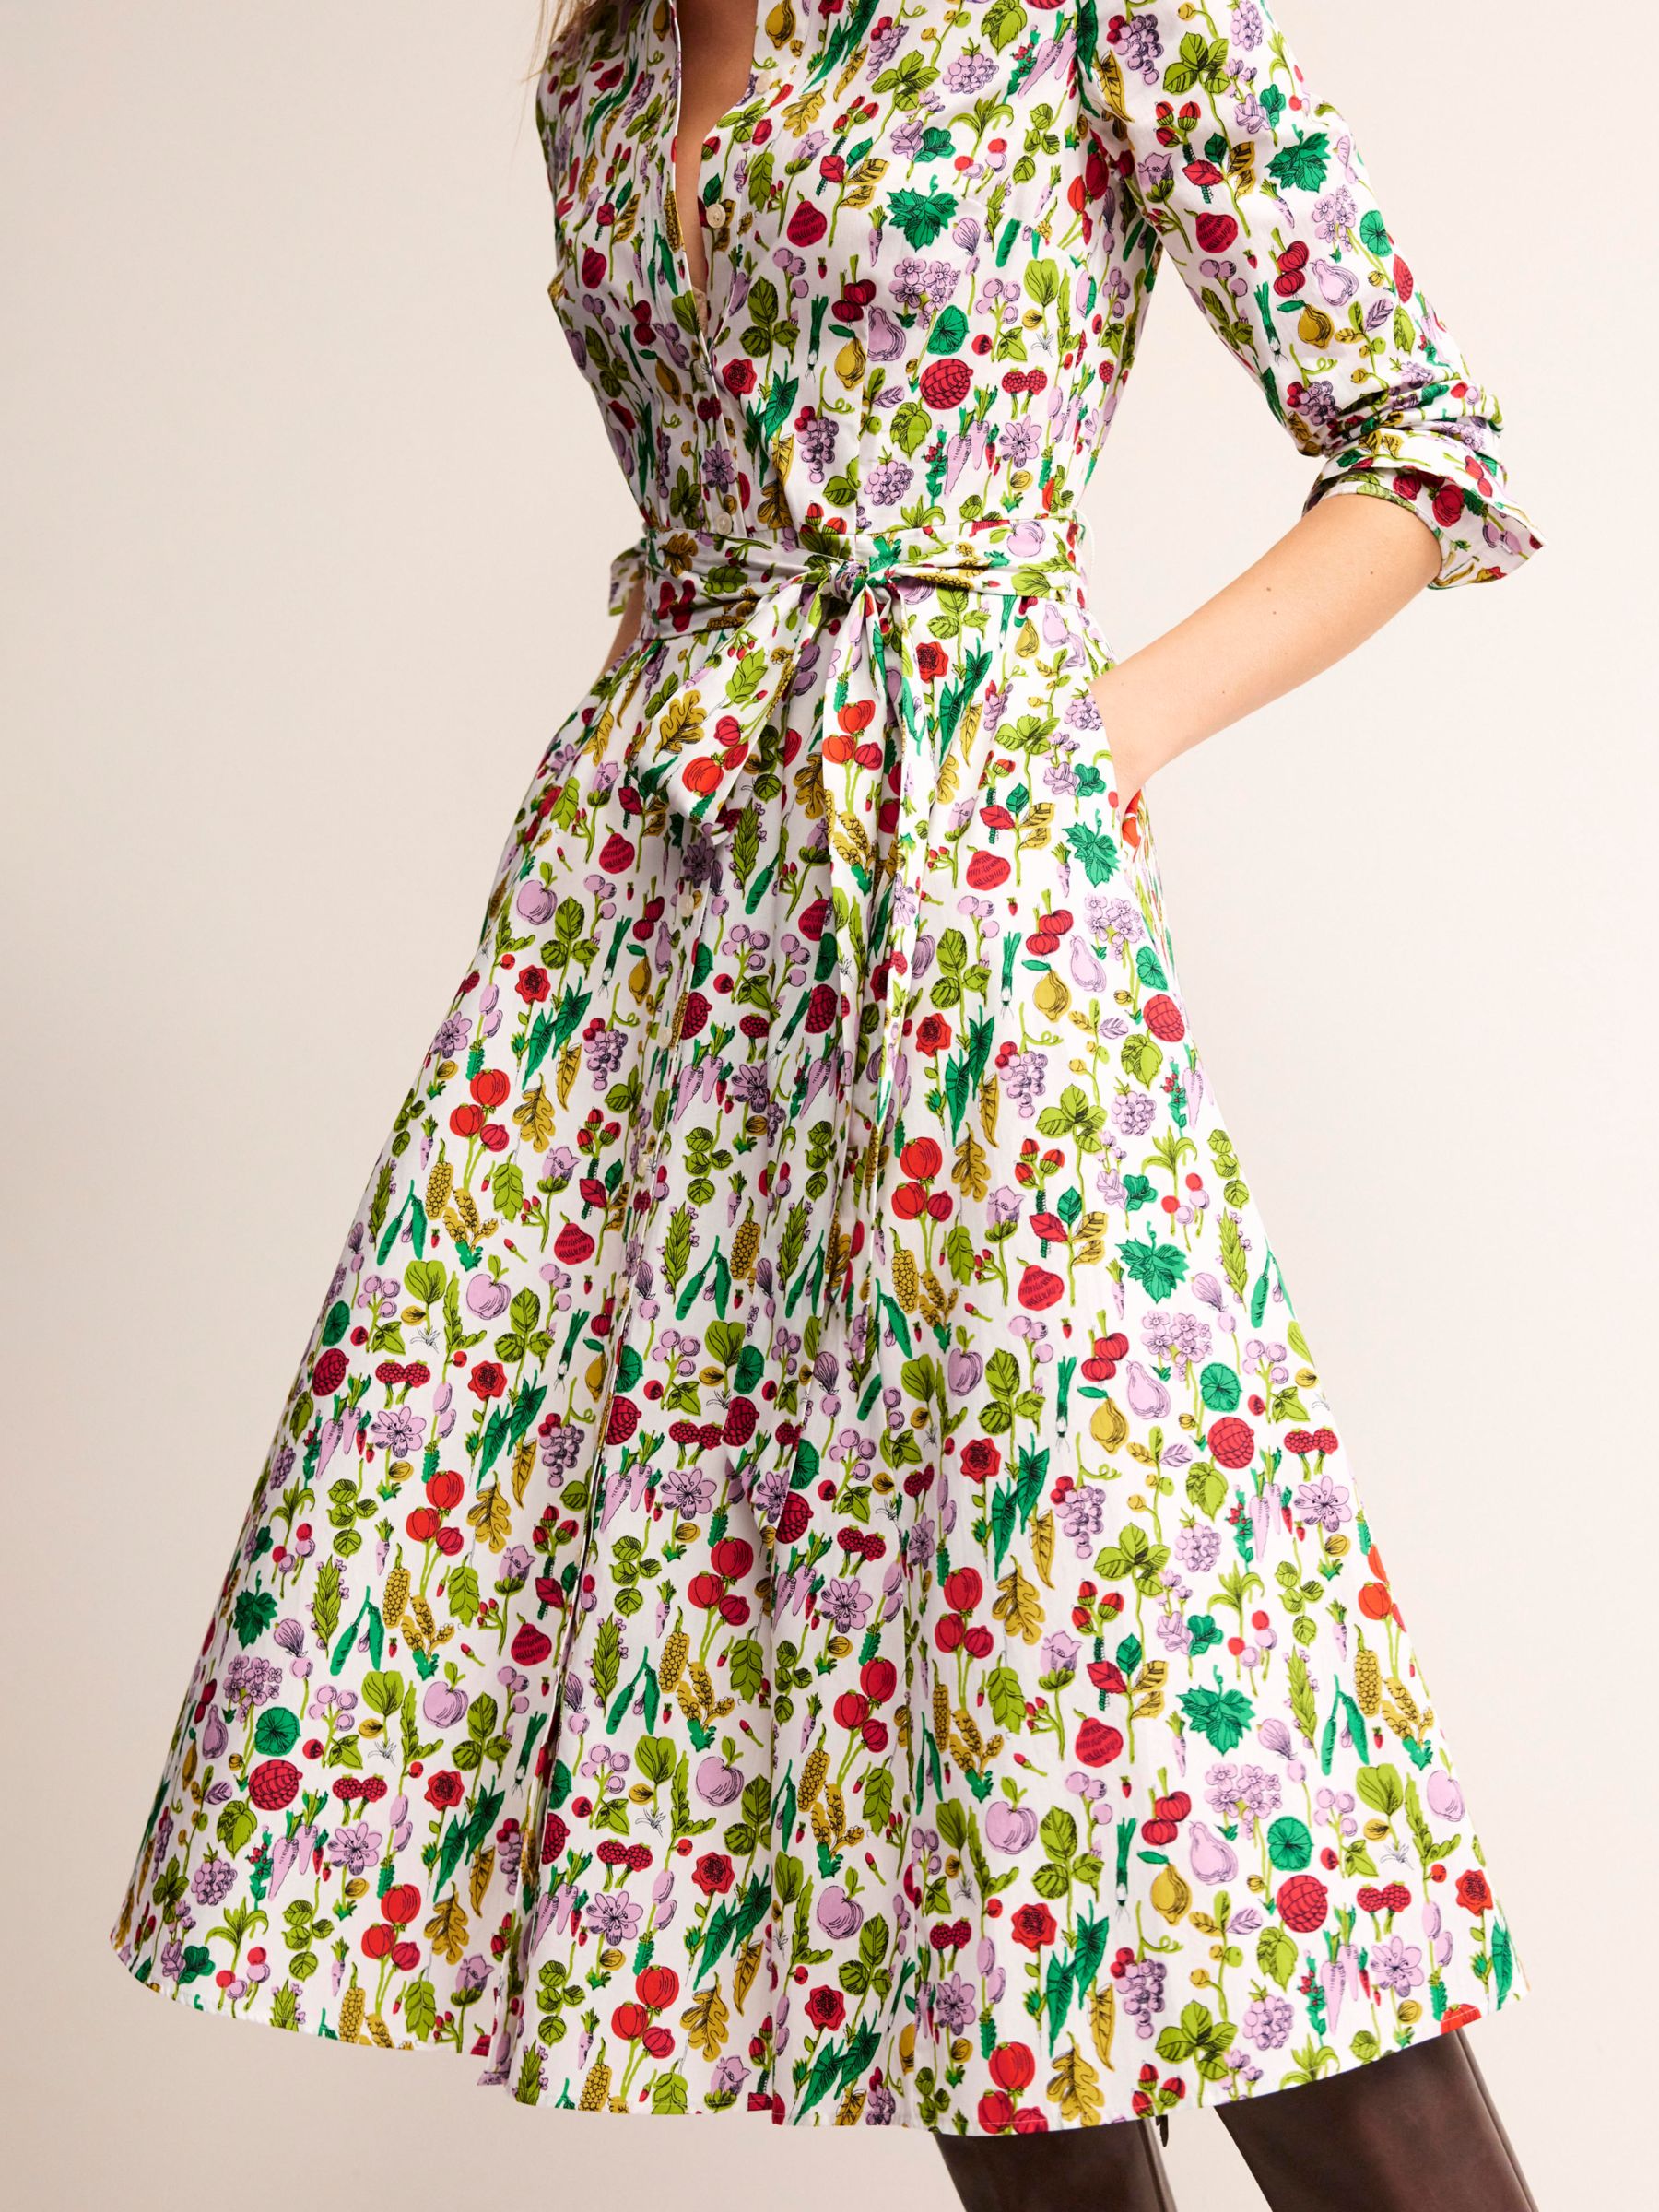 Buy Boden Amy Cotton Floral Midi Dress, Ivory/Multi Online at johnlewis.com